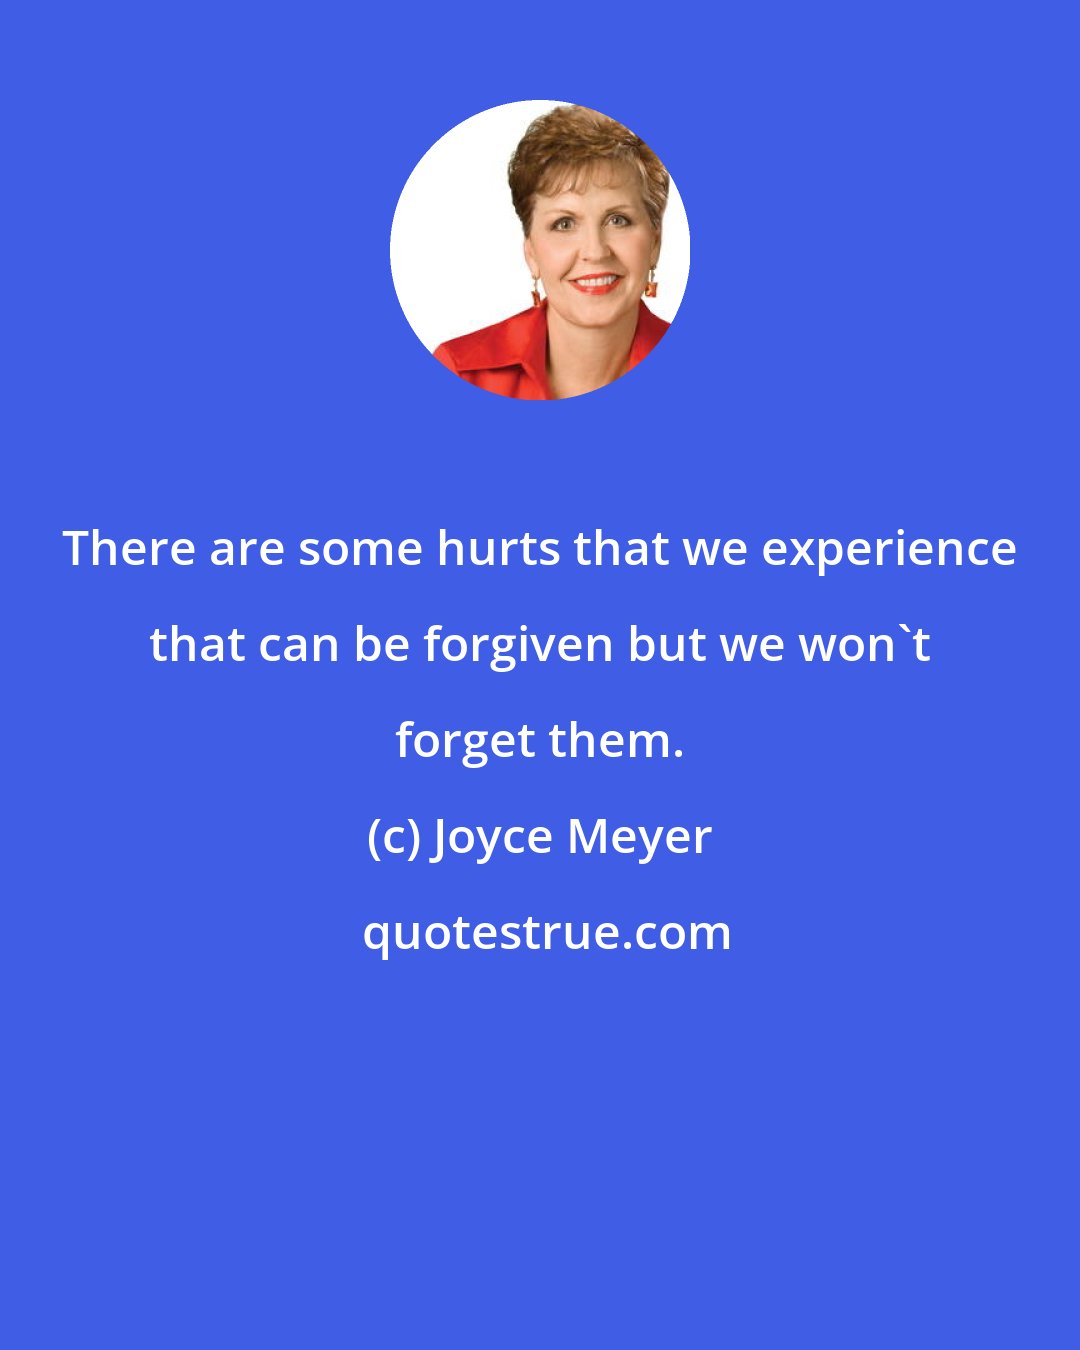 Joyce Meyer: There are some hurts that we experience that can be forgiven but we won't forget them.